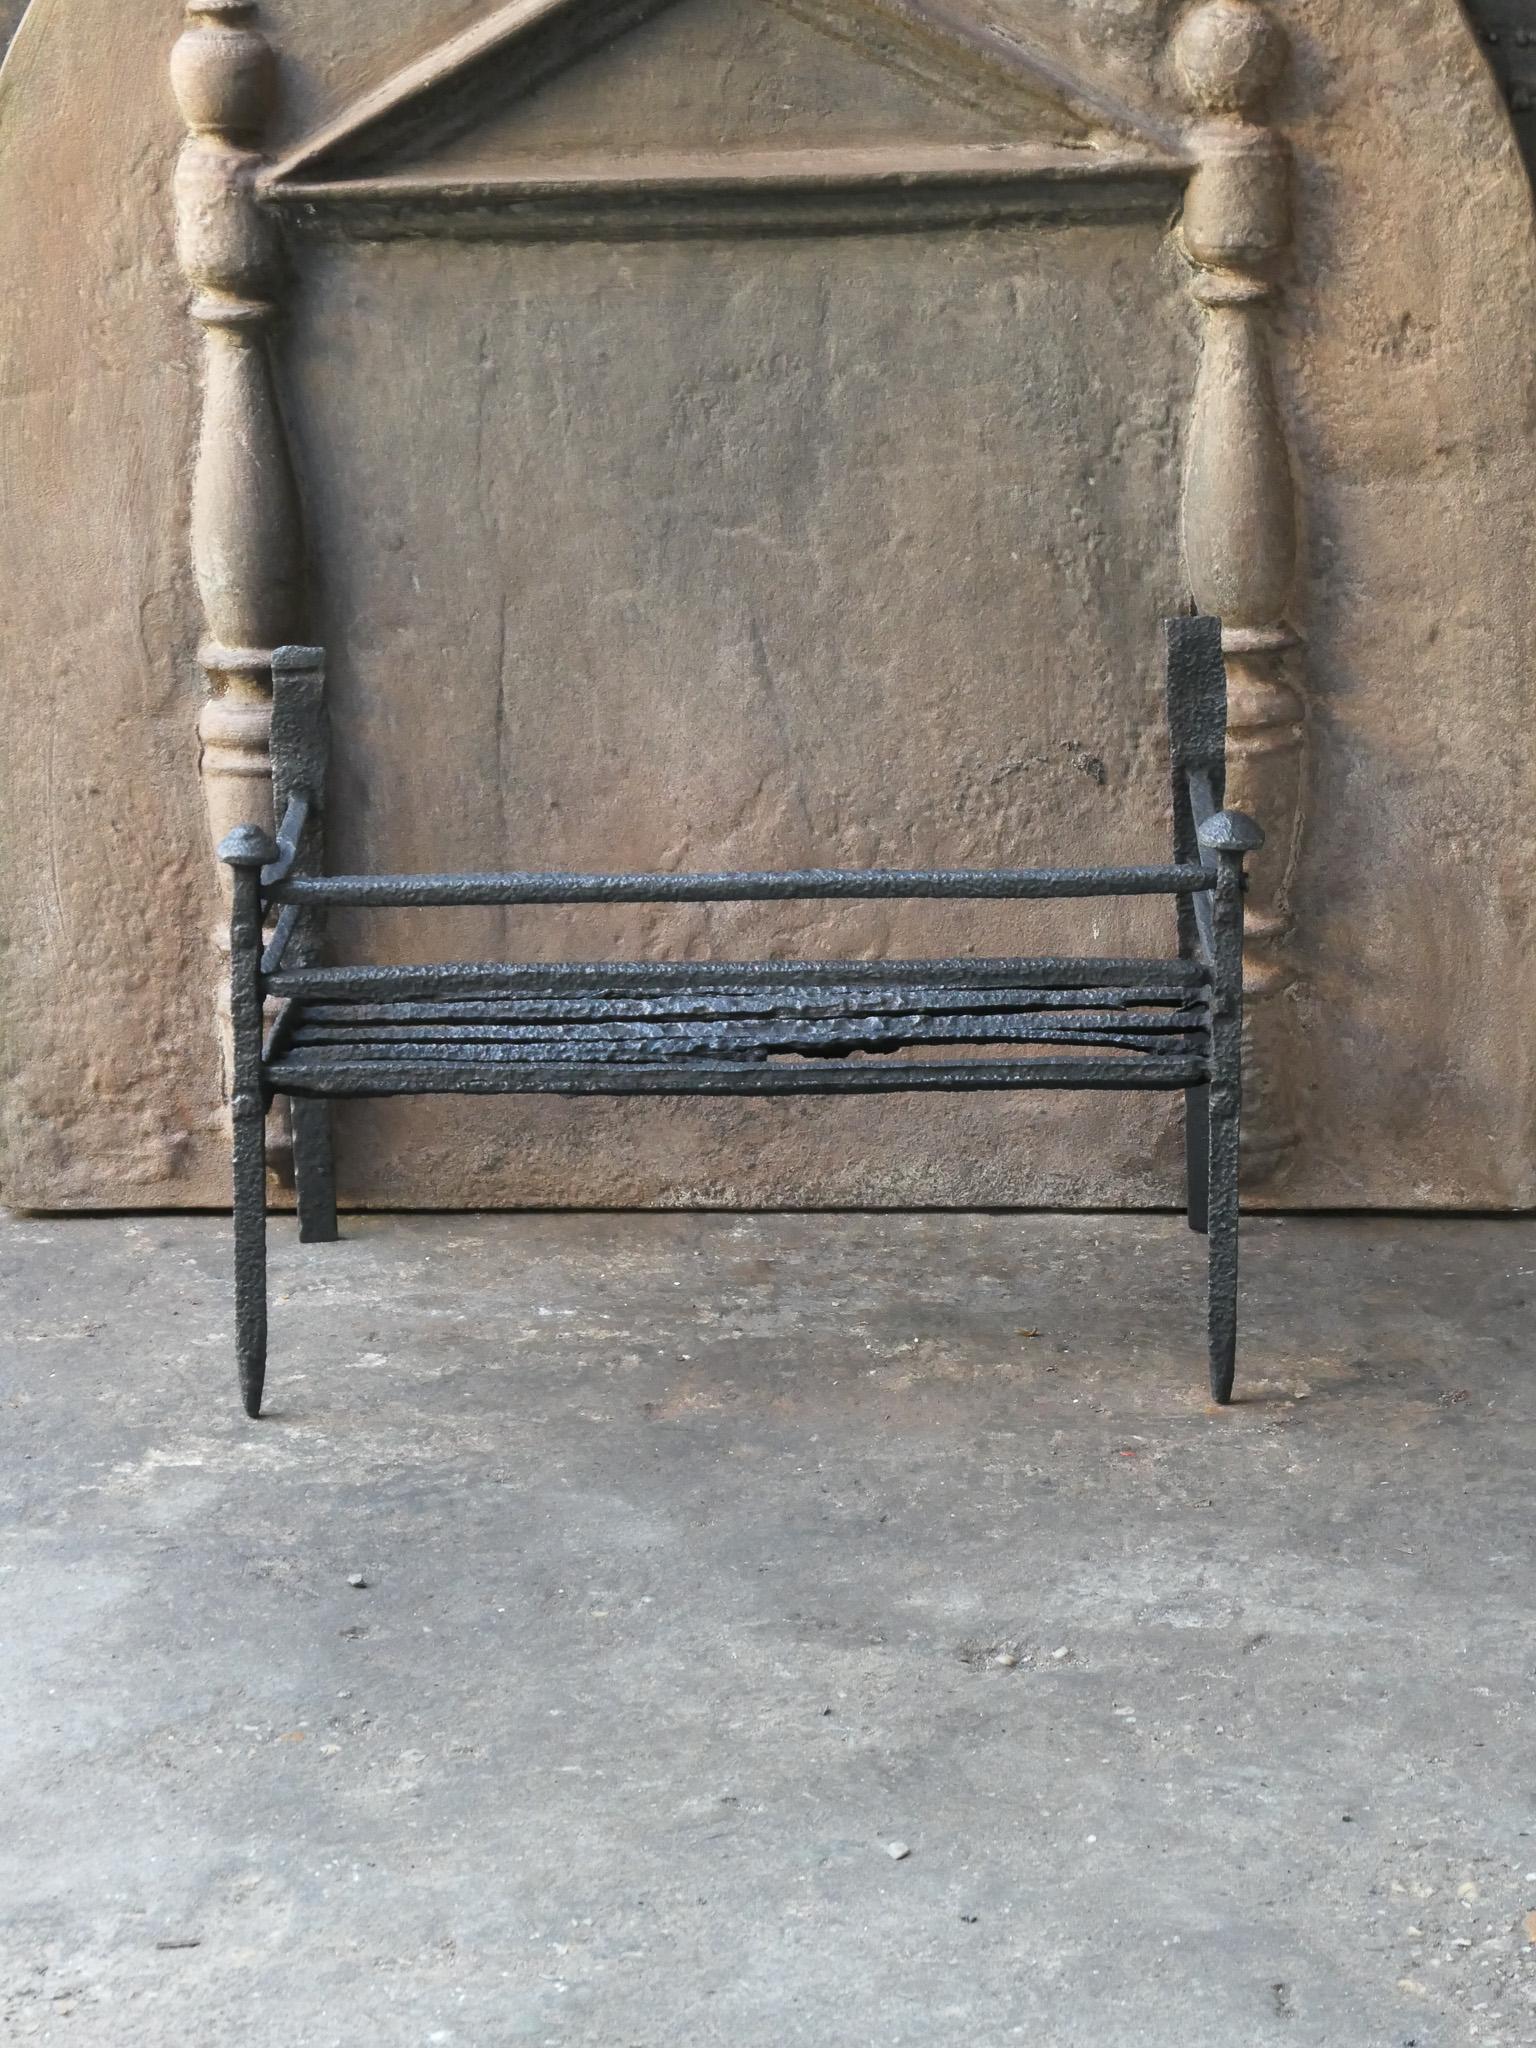 Late 17th or early 18th century French Gothic period fire grate. Hand forged of wrought iron. The condition of the basket is good. 









